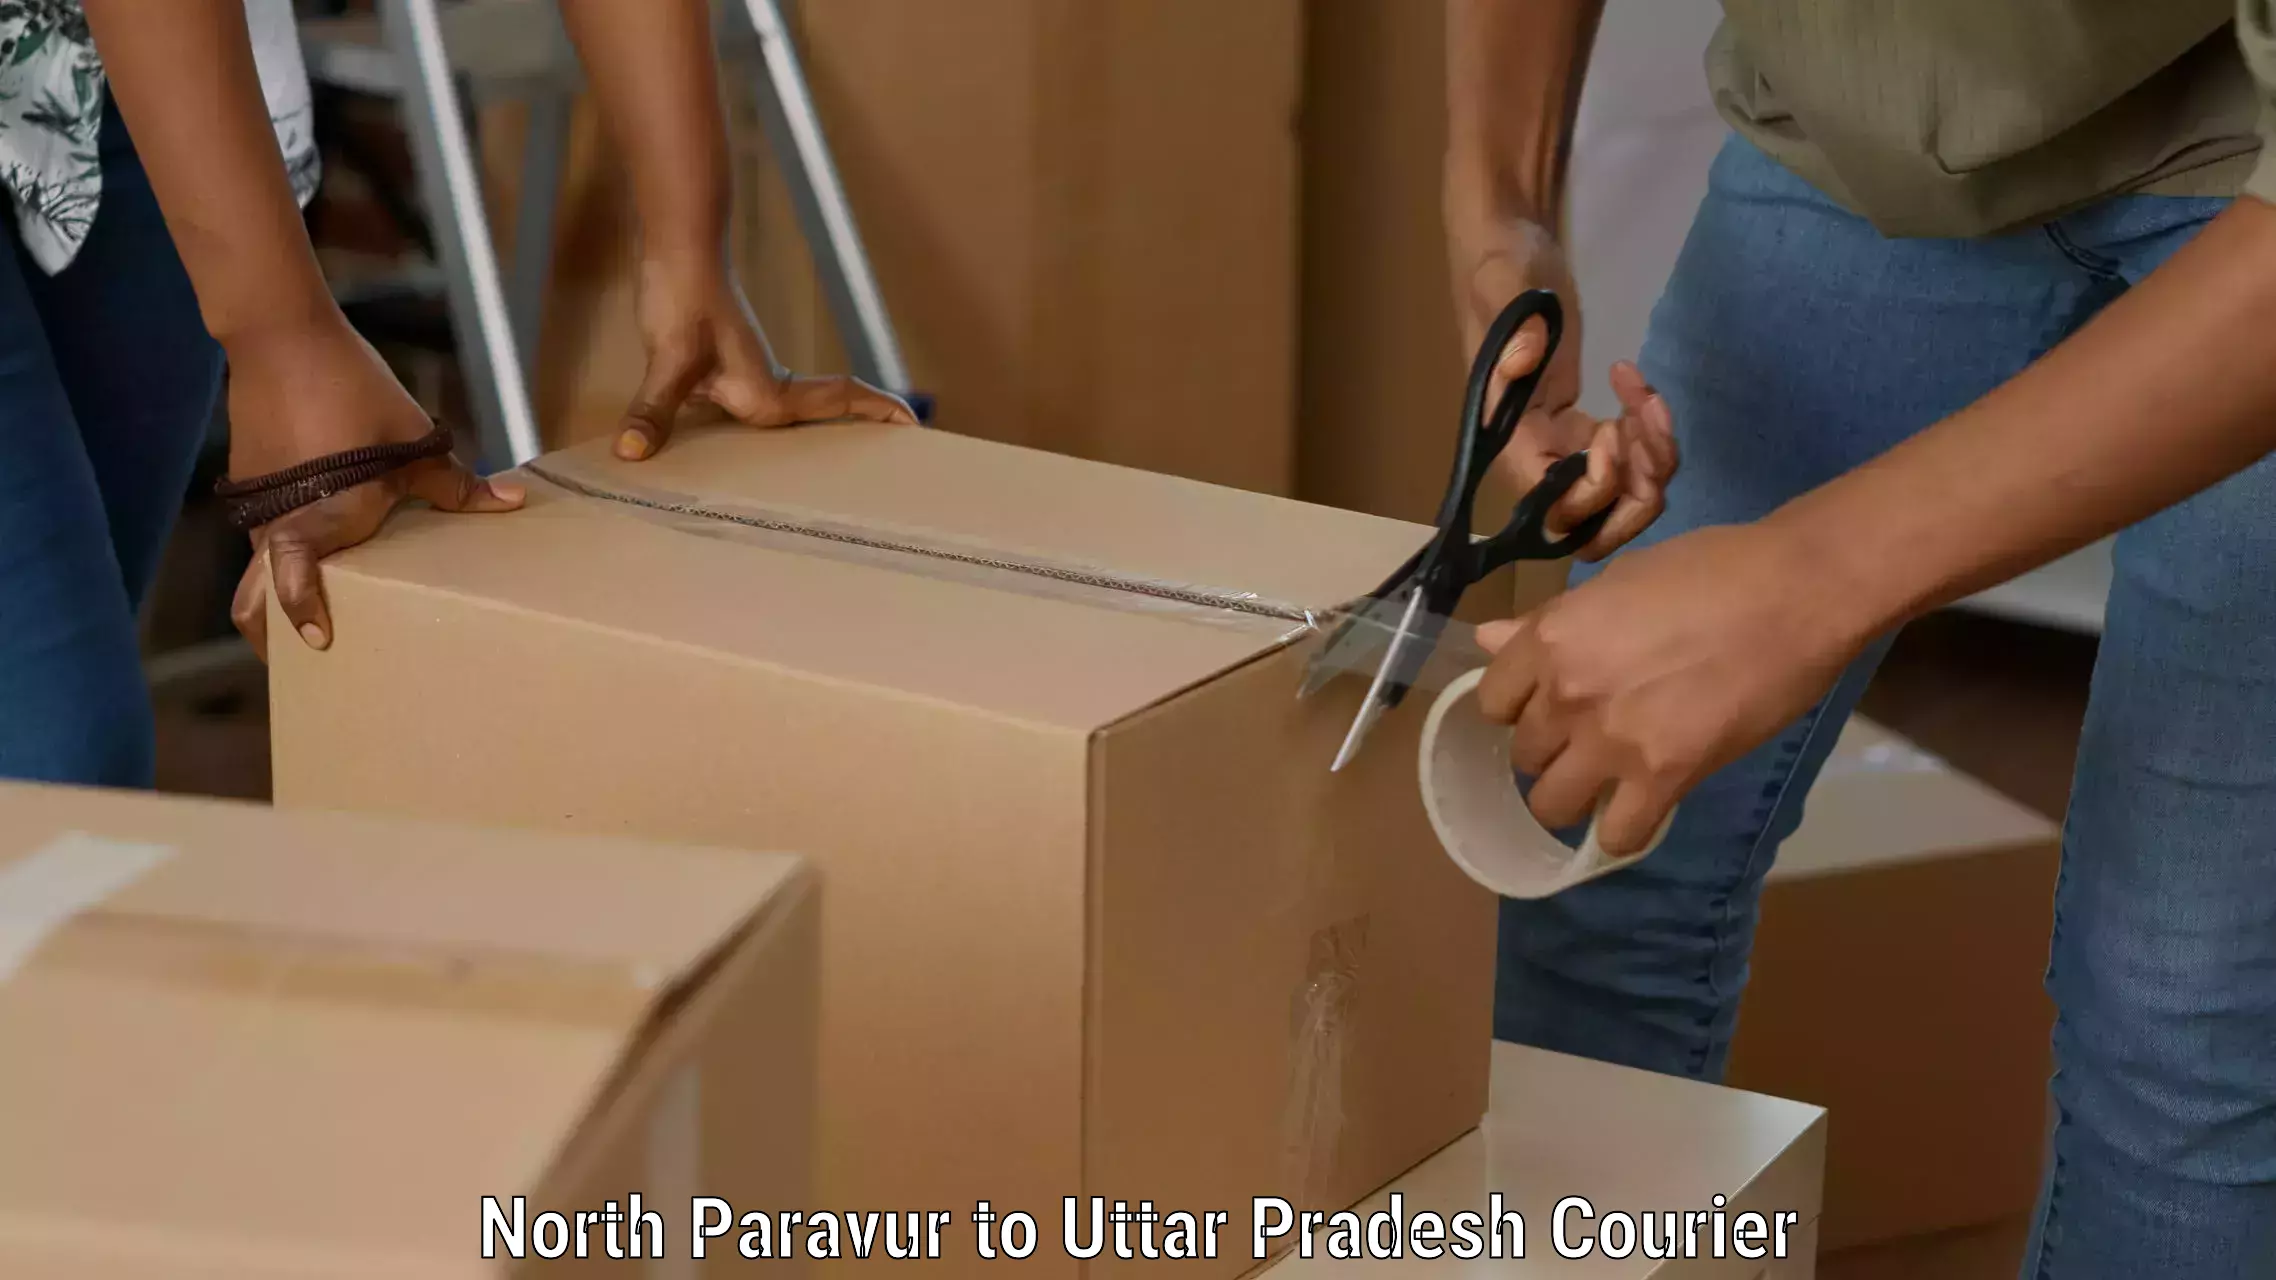 Nationwide courier service North Paravur to Baraut